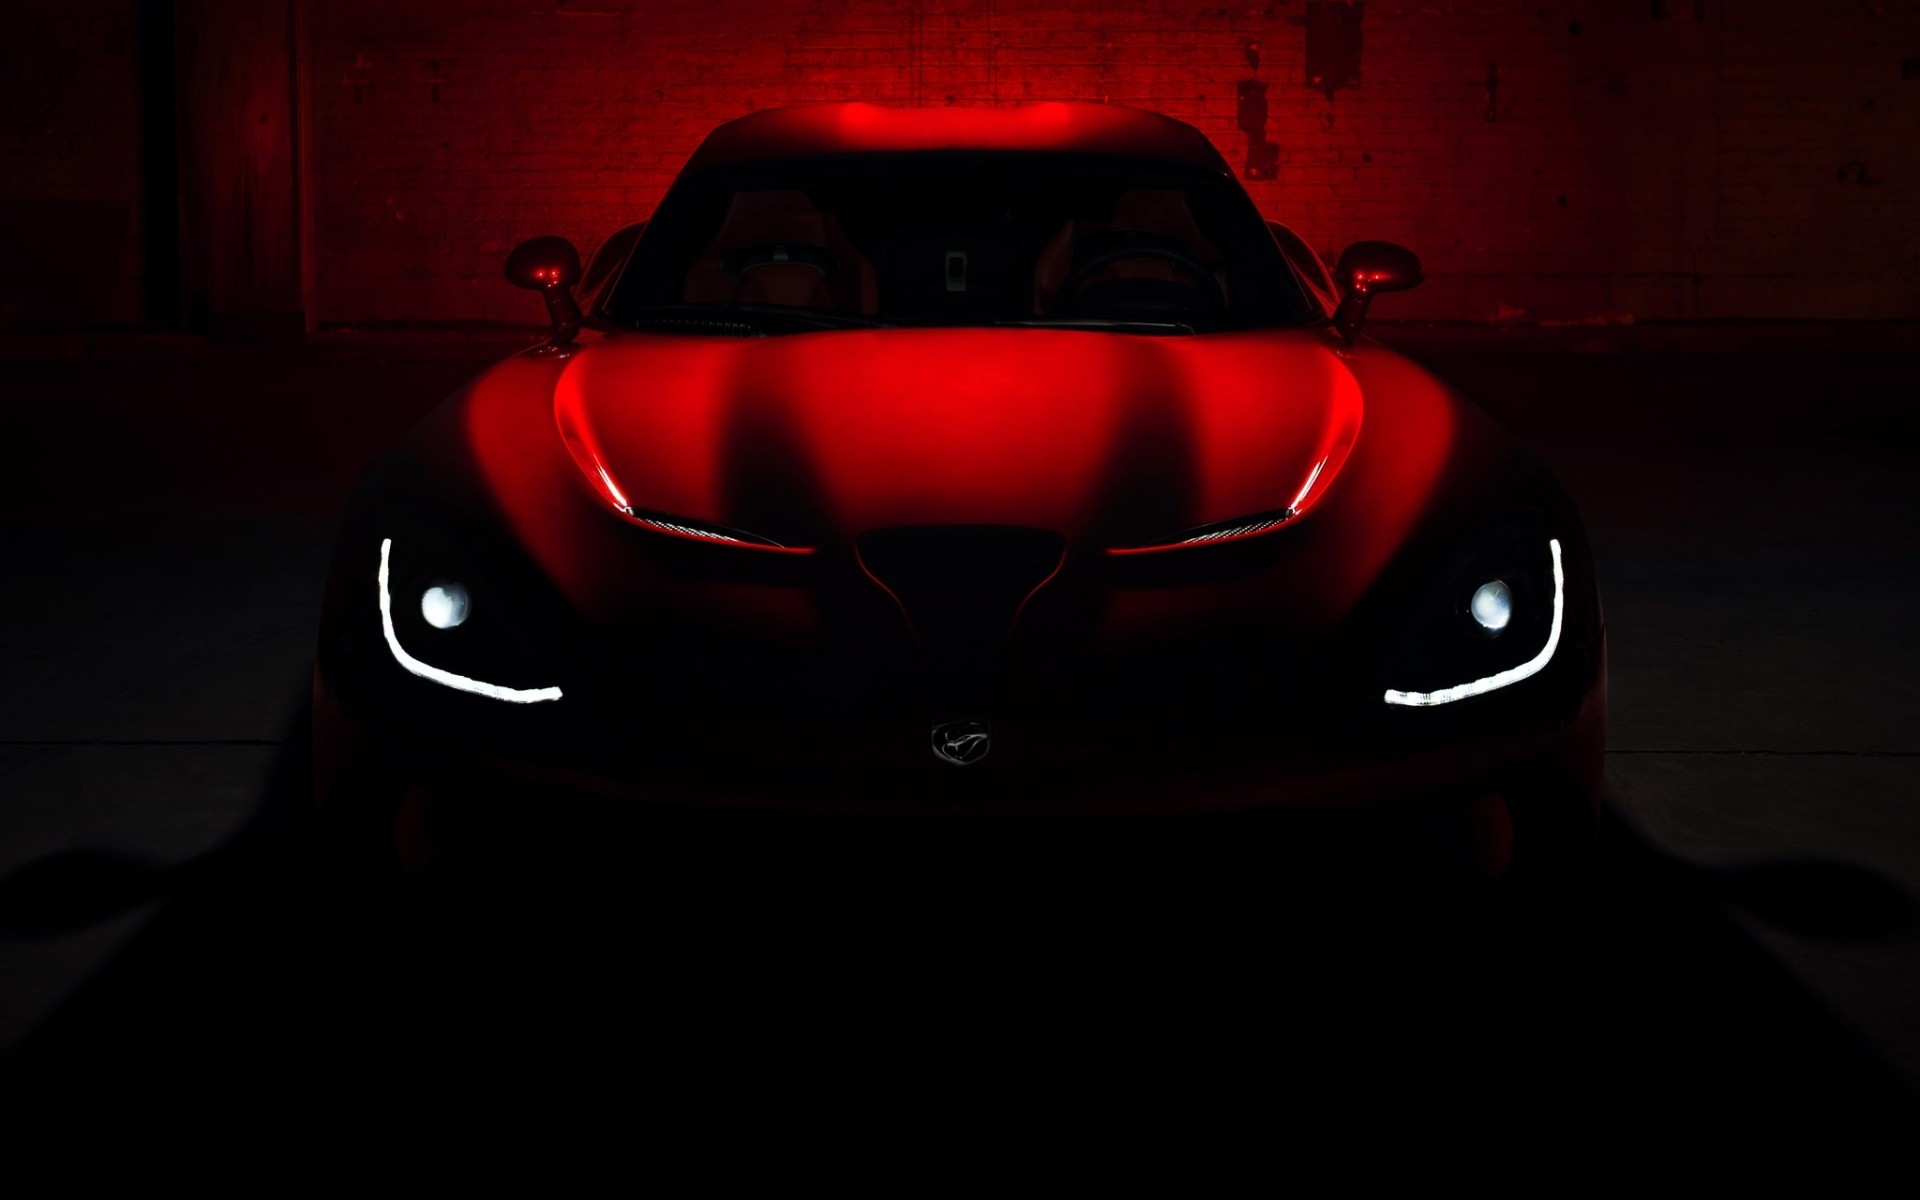 Dodge Srt Viper Gts Vehicles Cars Concept Red Glow Car Lights In